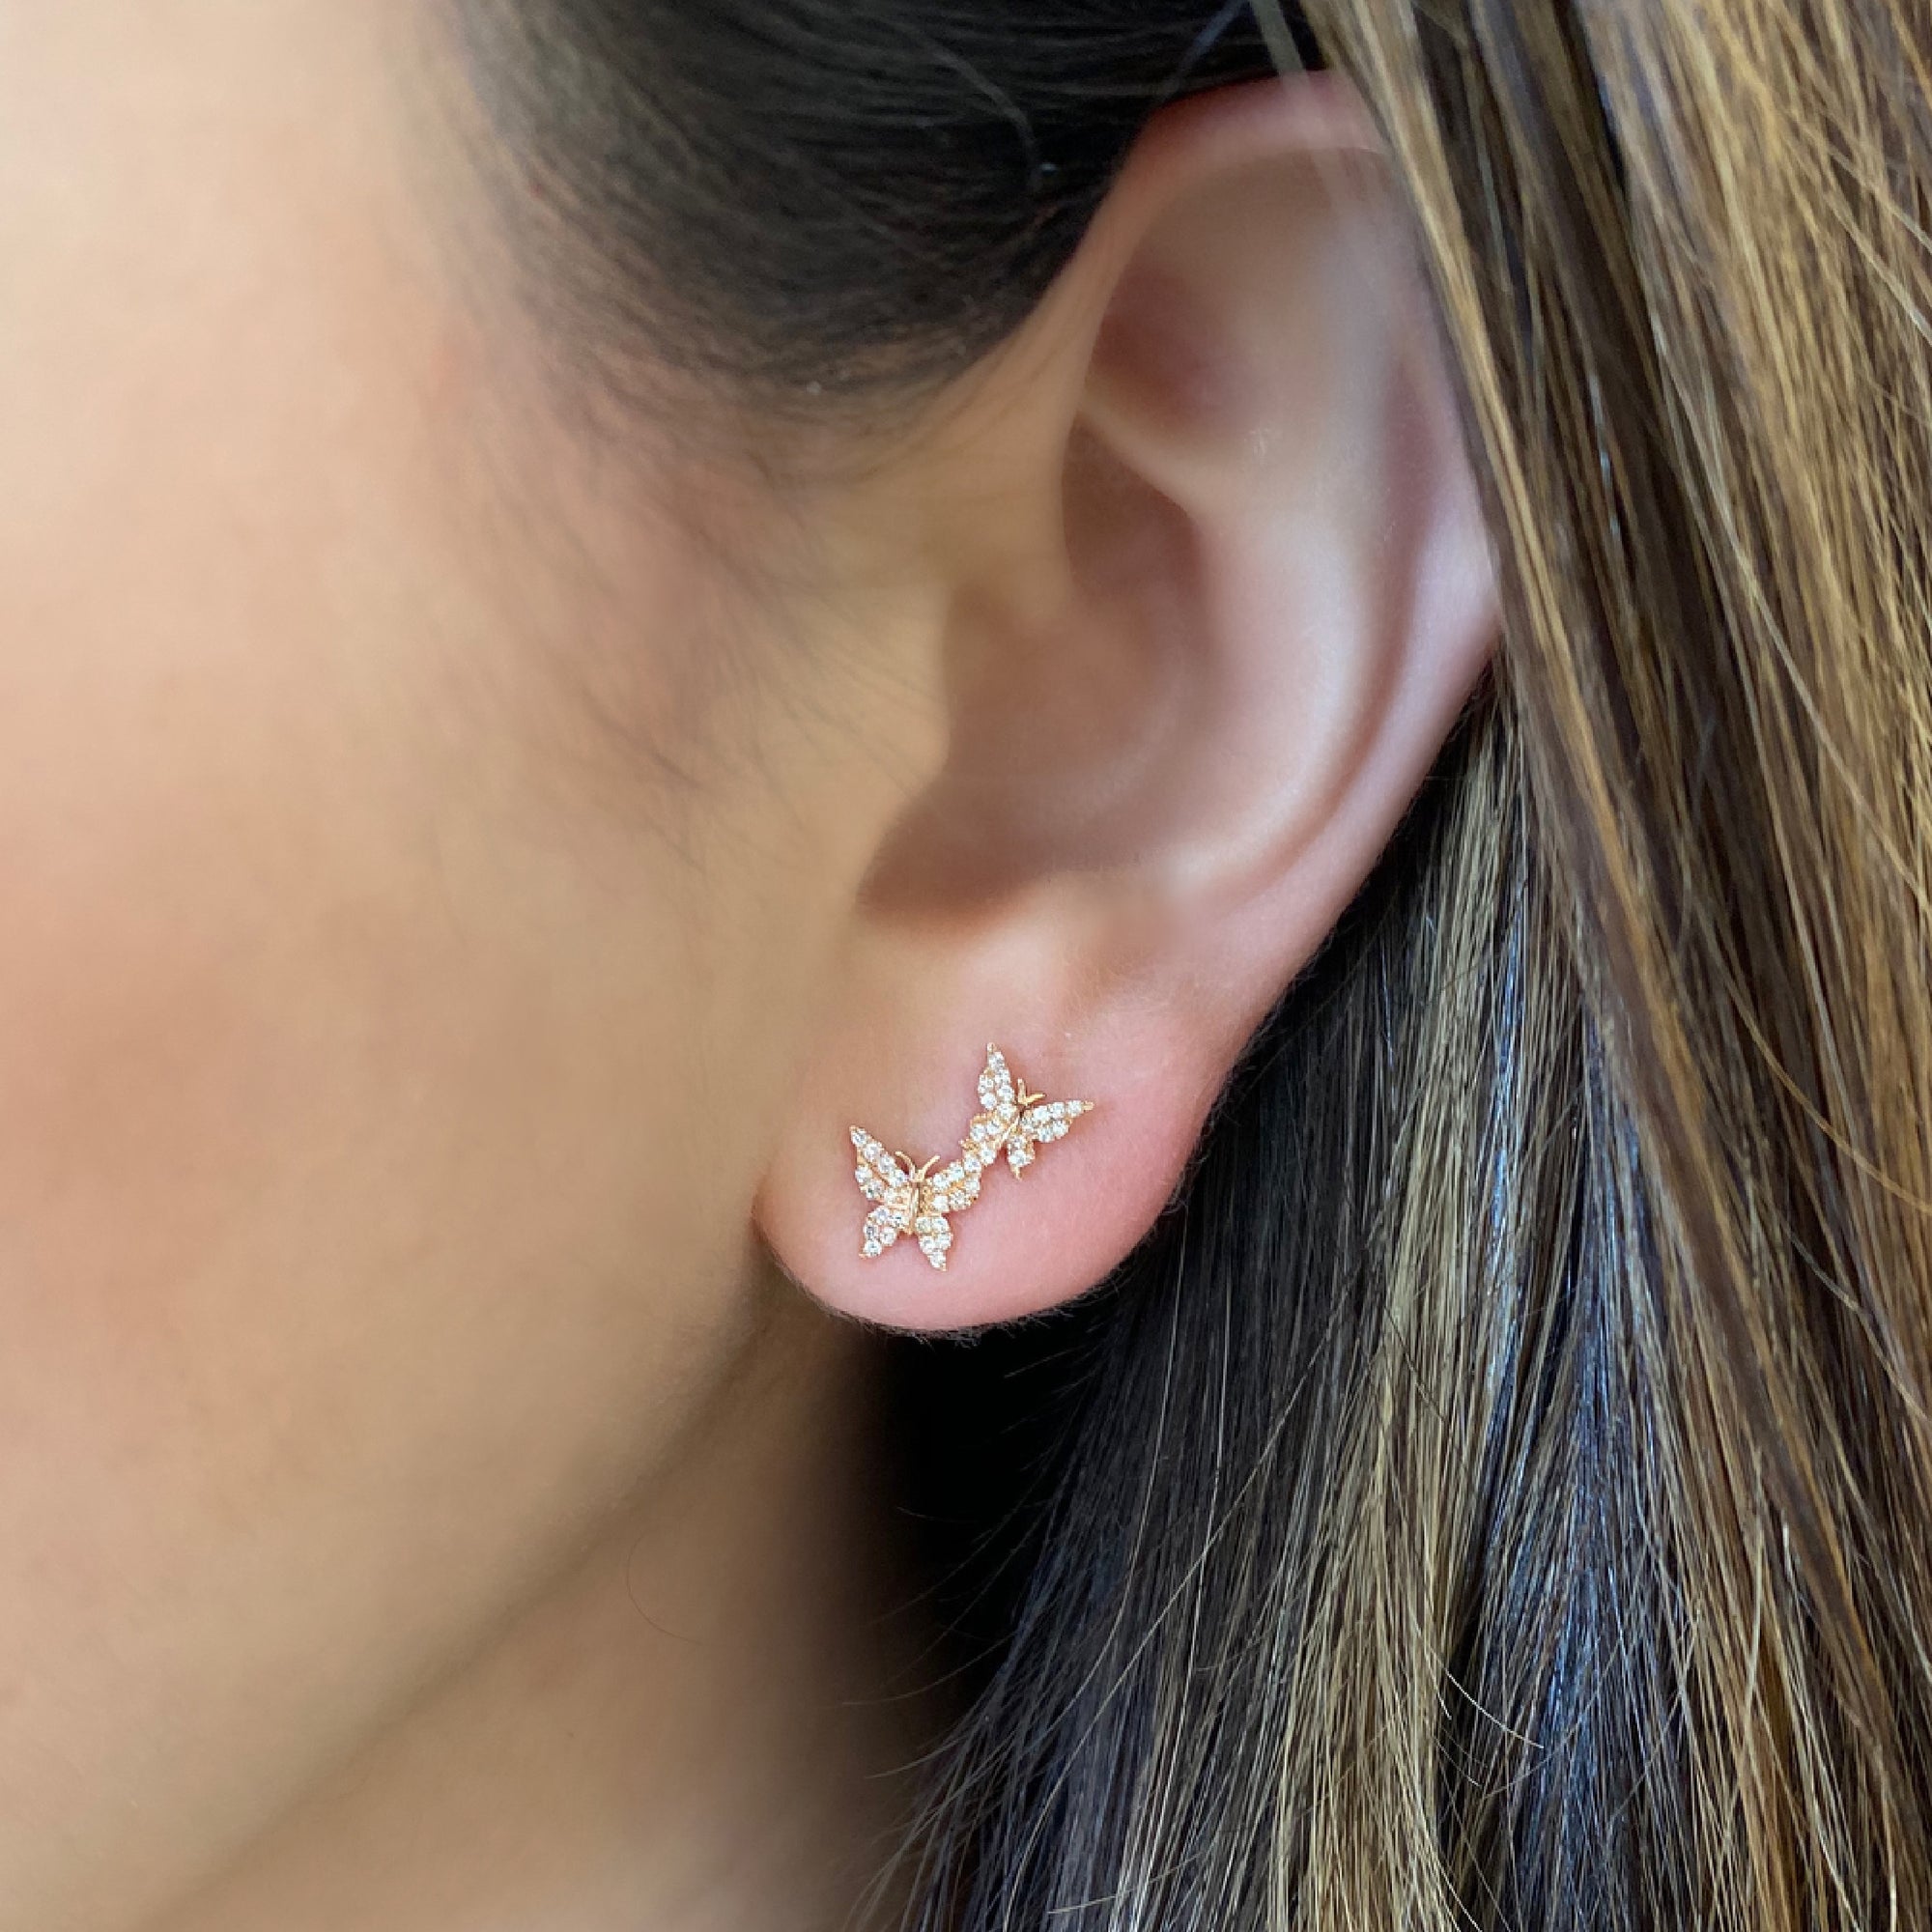 Diamond Butterfly Crawler Earrings - 14k gold weighing 1.50 grams - 70 round diamonds weighing .16 carats. Available in yellow, white, & rose gold.